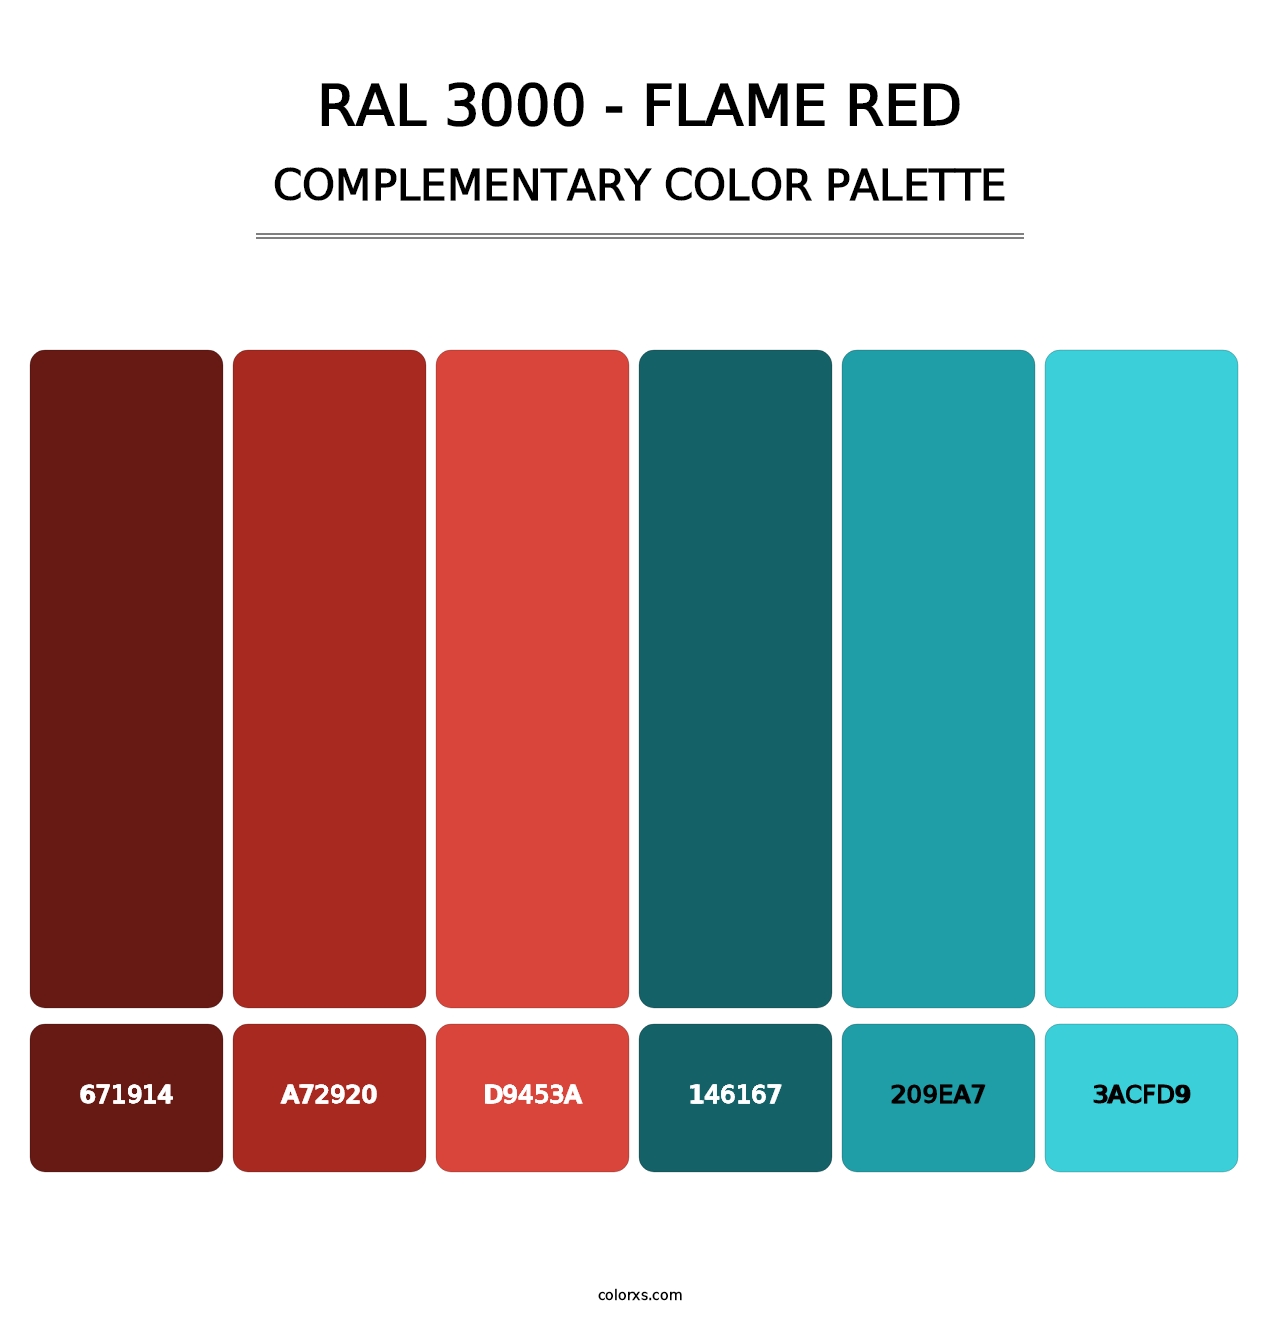 RAL 3000 - Flame Red - Complementary Color Palette